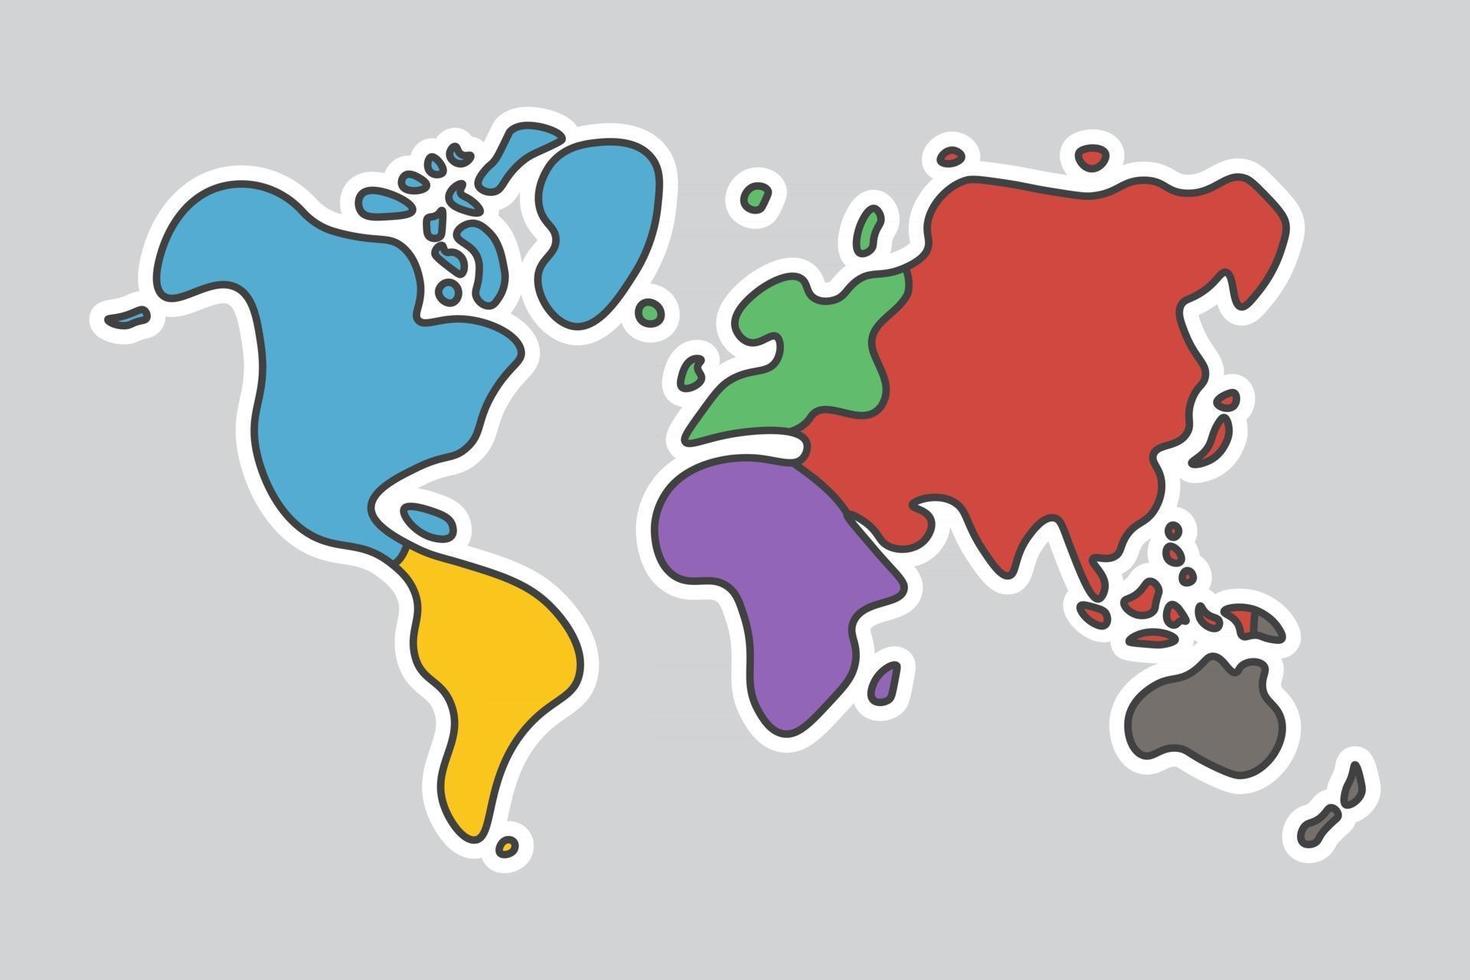 Doodle style world map  Look like children craft painting vector